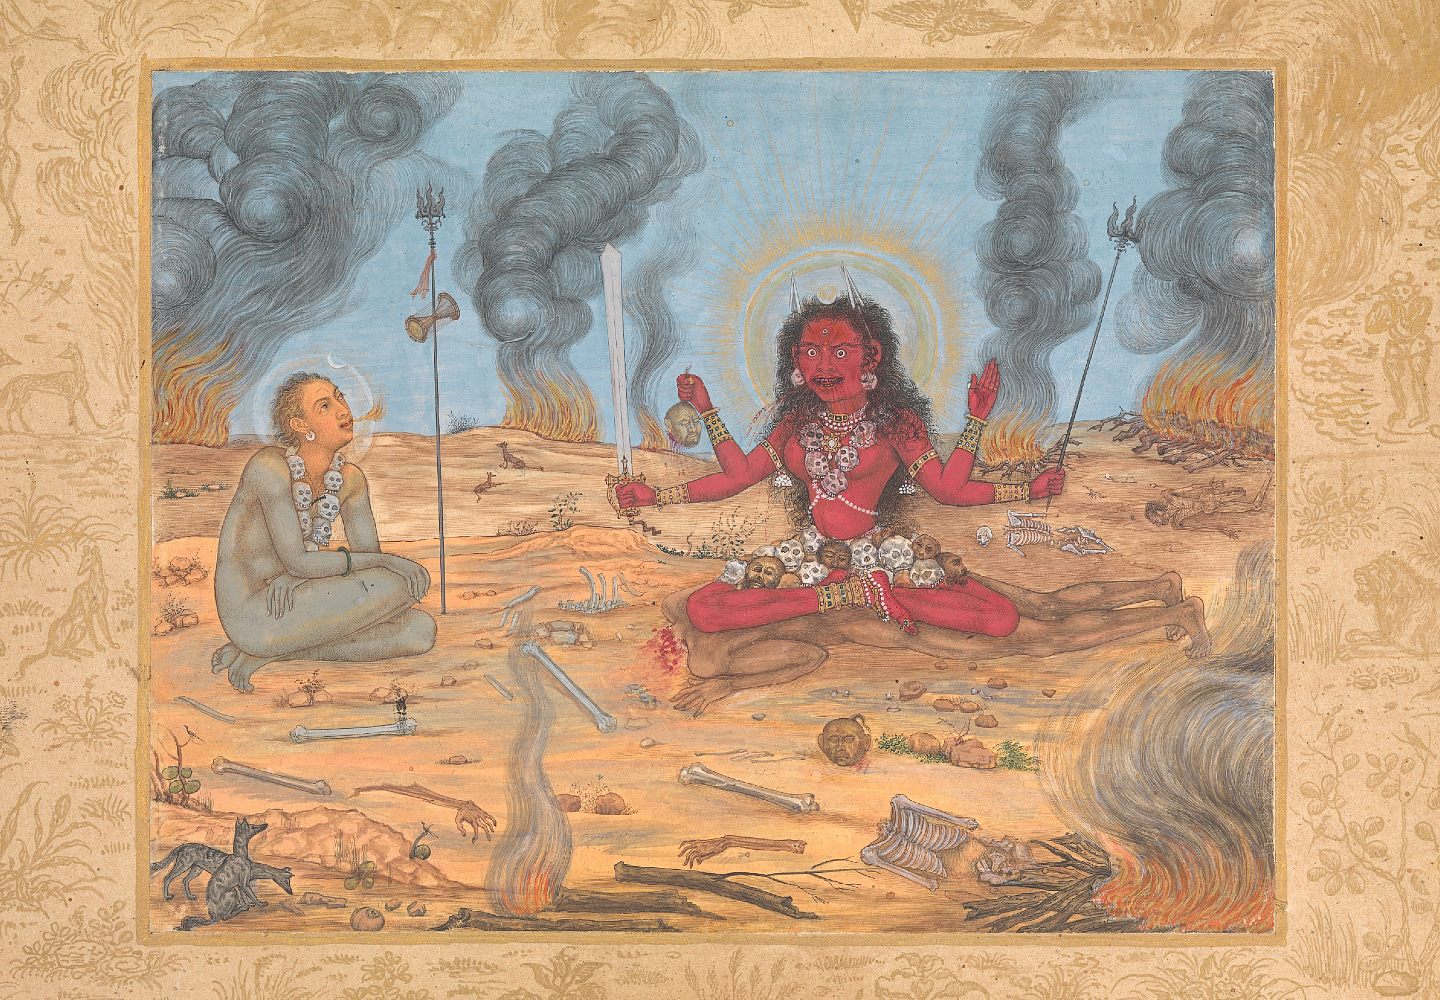 Insider Insights – Esoteric Visions: The Goddess Bhairavi Devi by the Mughal Artist Payag